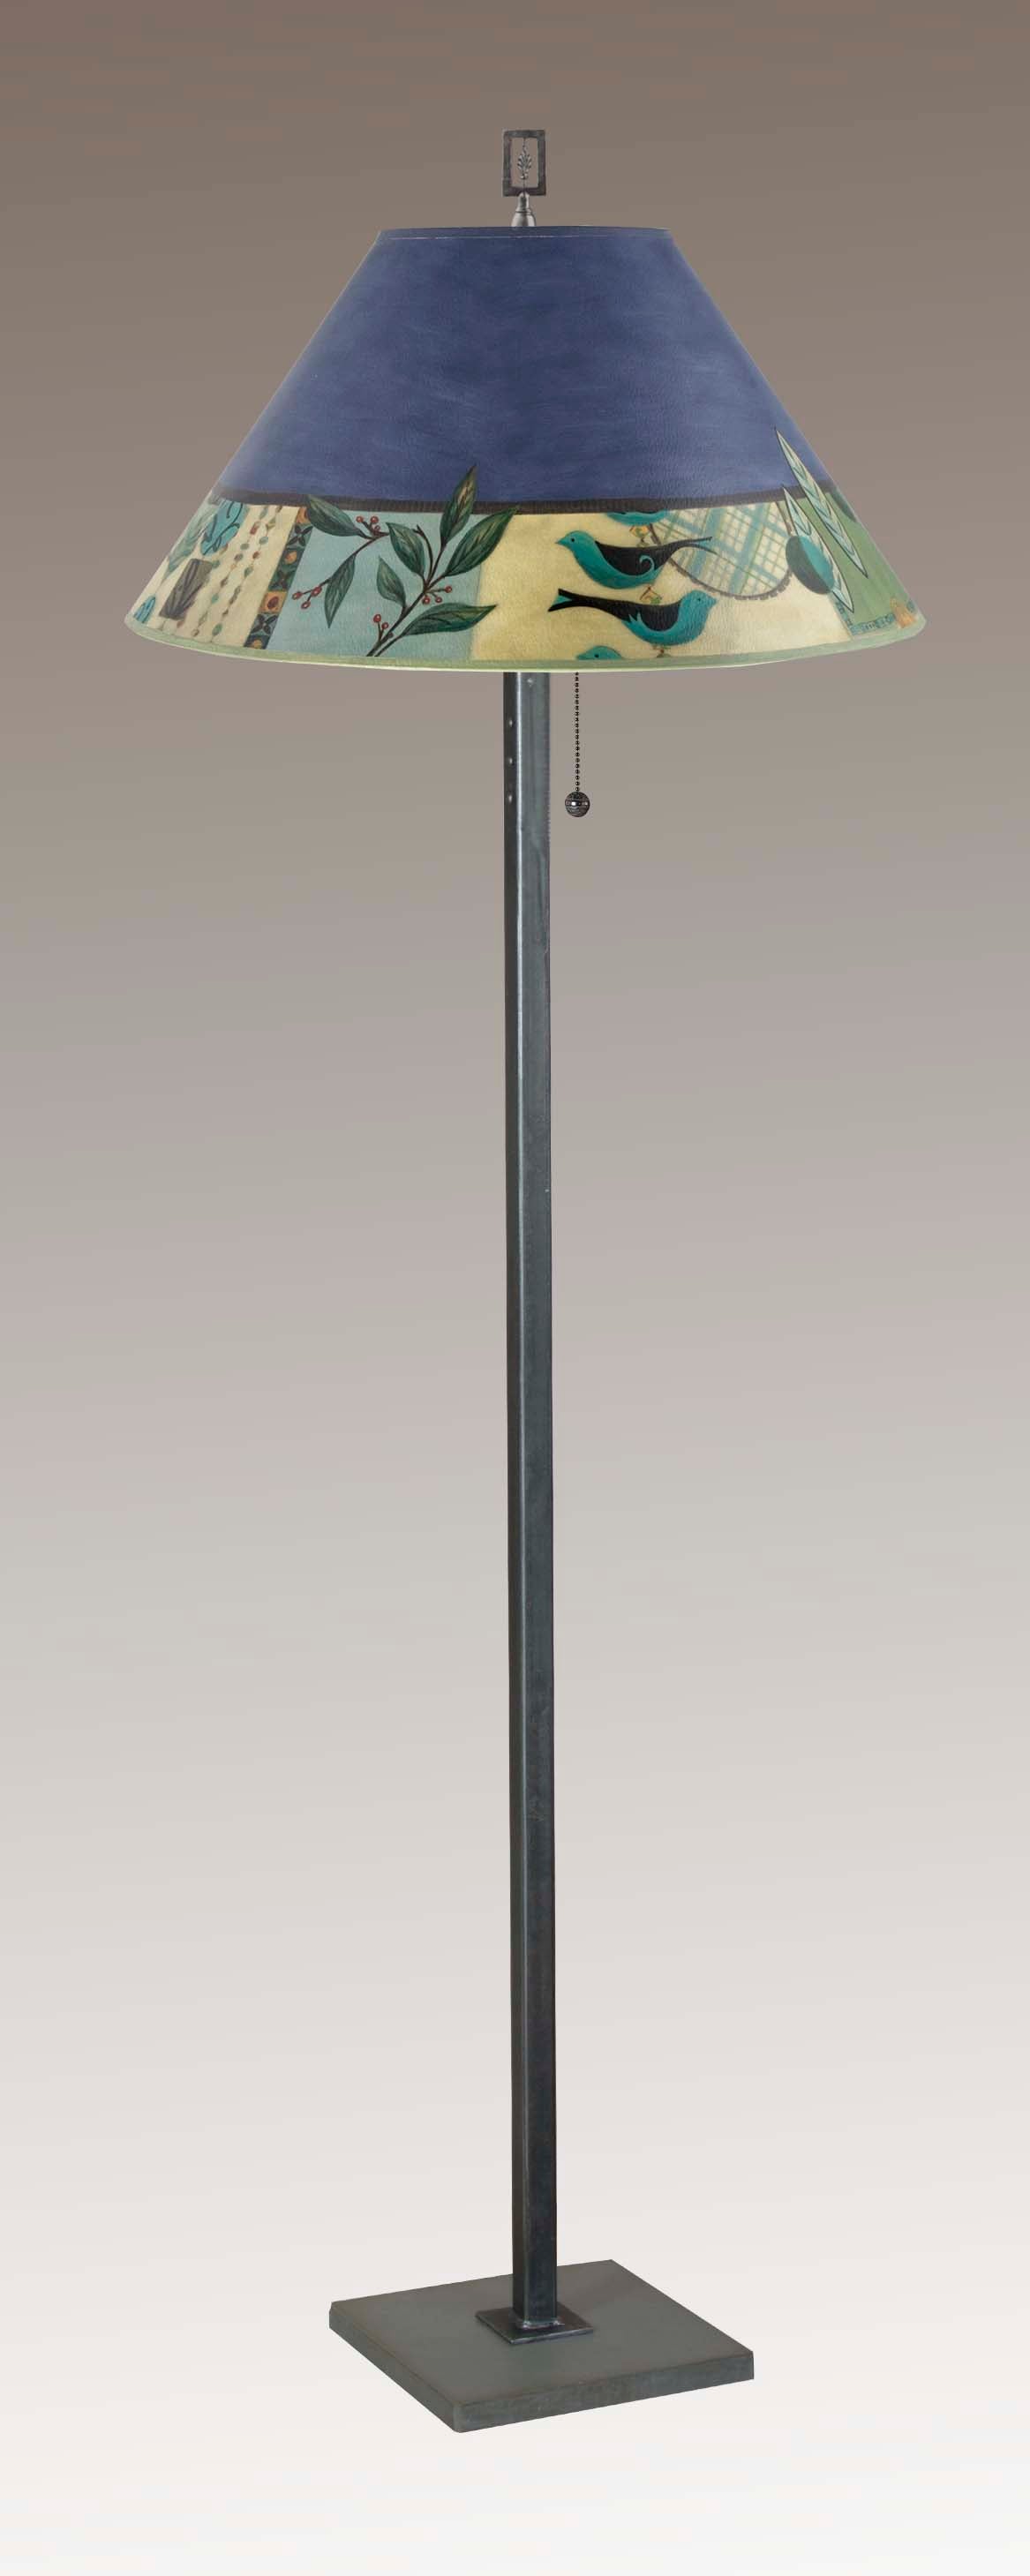 Janna Ugone & Co Floor Lamp Steel Floor Lamp with Large Conical Shade in New Capri Periwinkle